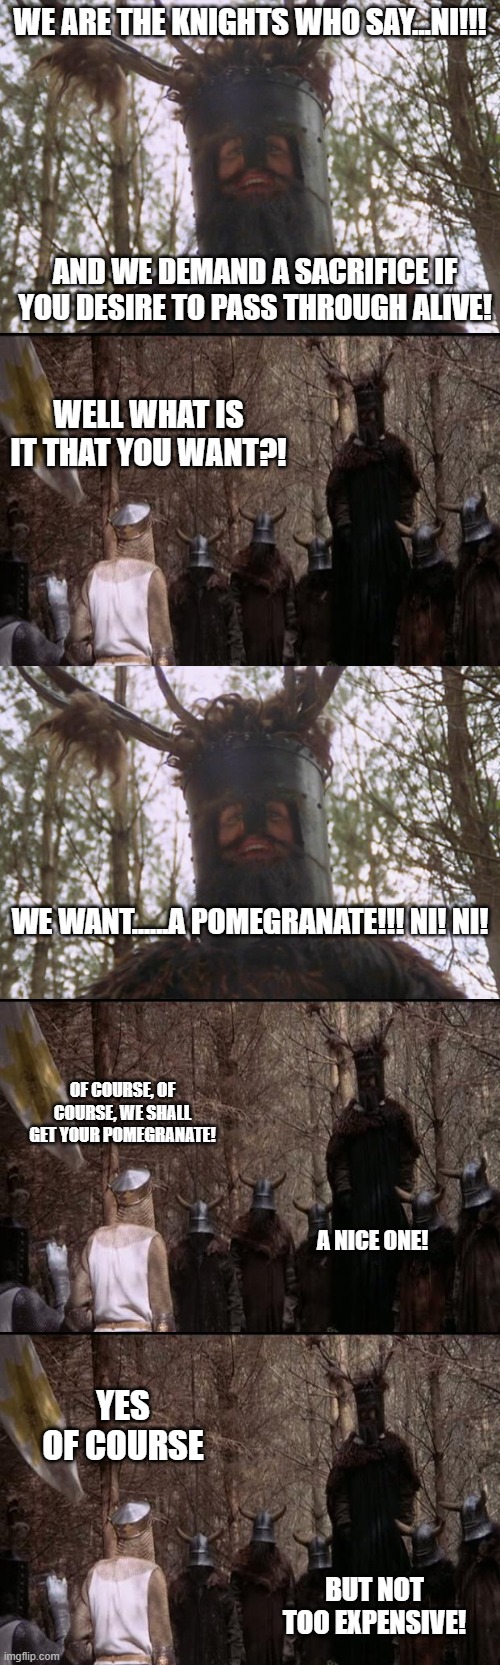 NNNNNIIII!!!  NI! NI! | WE ARE THE KNIGHTS WHO SAY...NI!!! AND WE DEMAND A SACRIFICE IF YOU DESIRE TO PASS THROUGH ALIVE! WELL WHAT IS IT THAT YOU WANT?! WE WANT......A POMEGRANATE!!! NI! NI! OF COURSE, OF COURSE, WE SHALL GET YOUR POMEGRANATE! A NICE ONE! YES OF COURSE; BUT NOT TOO EXPENSIVE! | image tagged in knights who say ni,pomegranate,awards | made w/ Imgflip meme maker